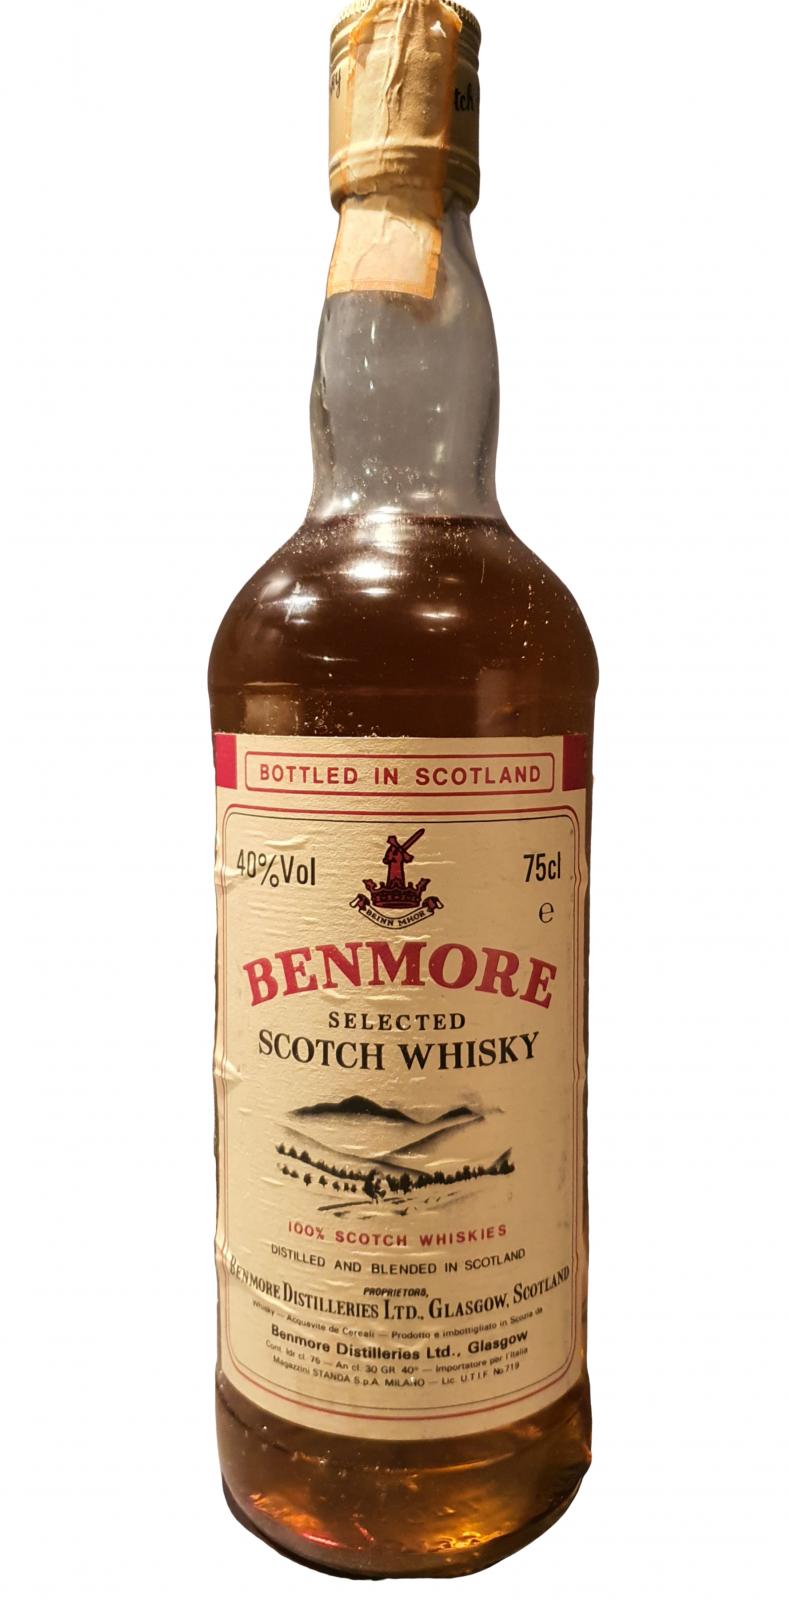 Benmore Selected Scotch Whisky 100% Scotch Whiskies Standa Import 40% 750ml